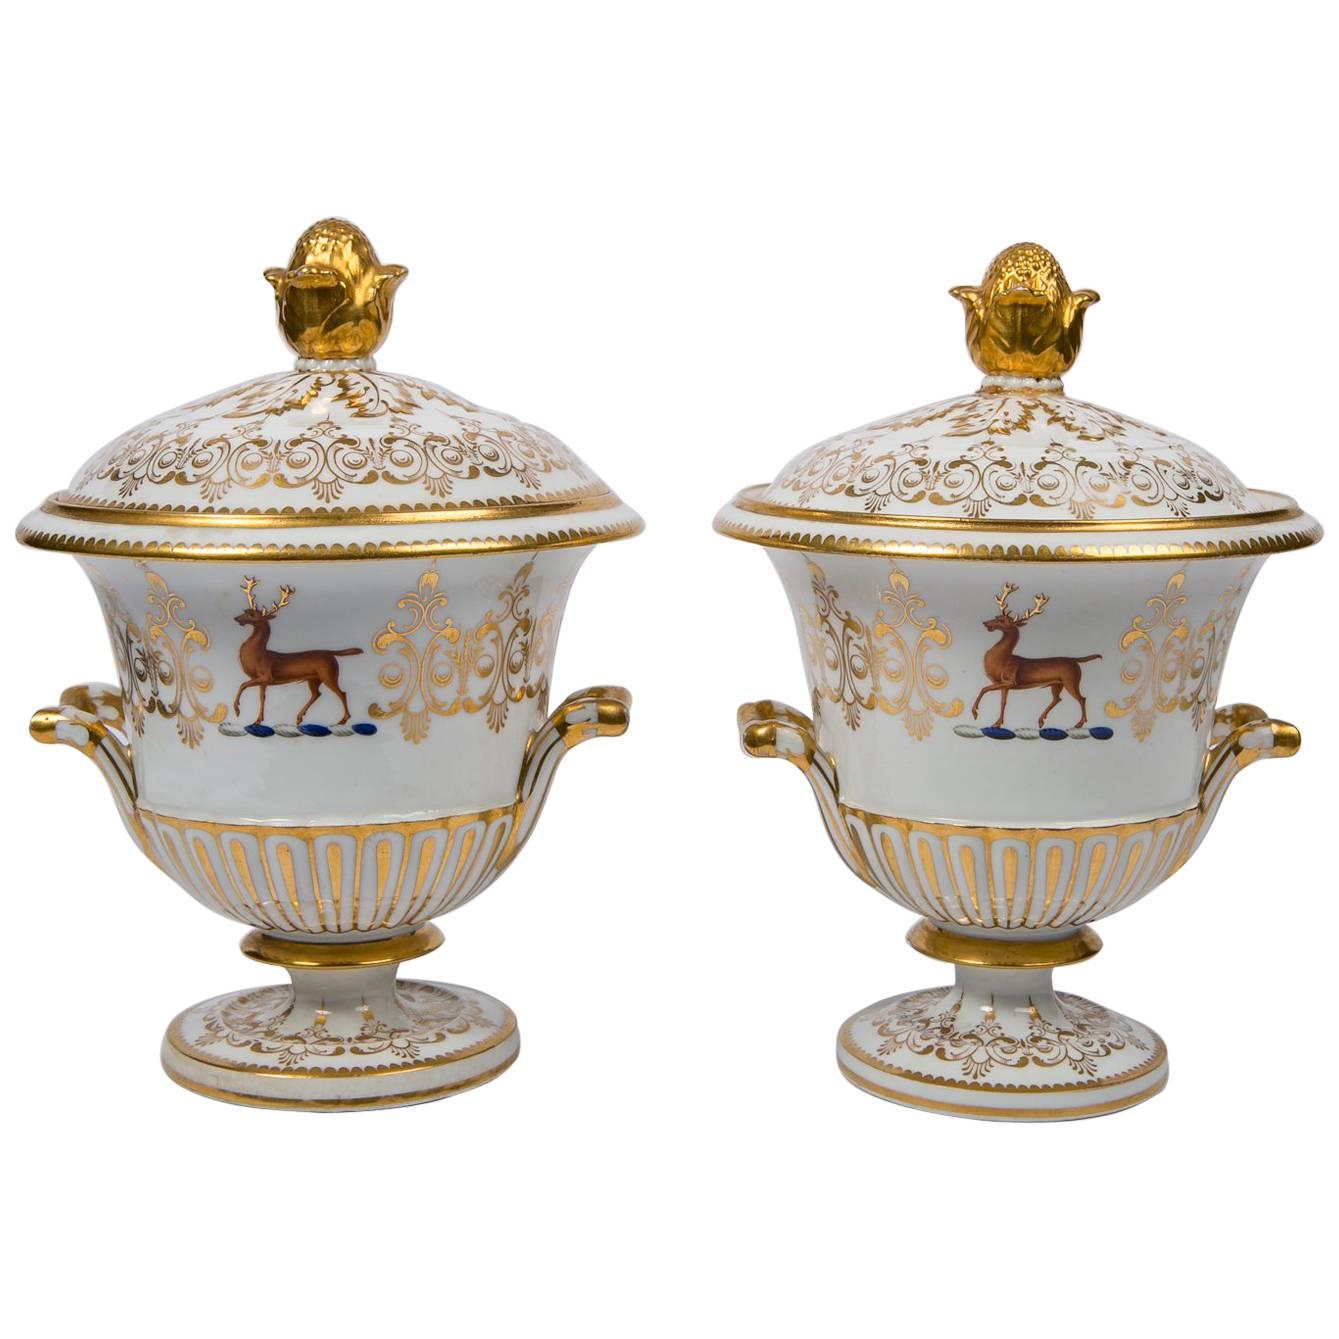 Pair of Tureens with Armorial Crests